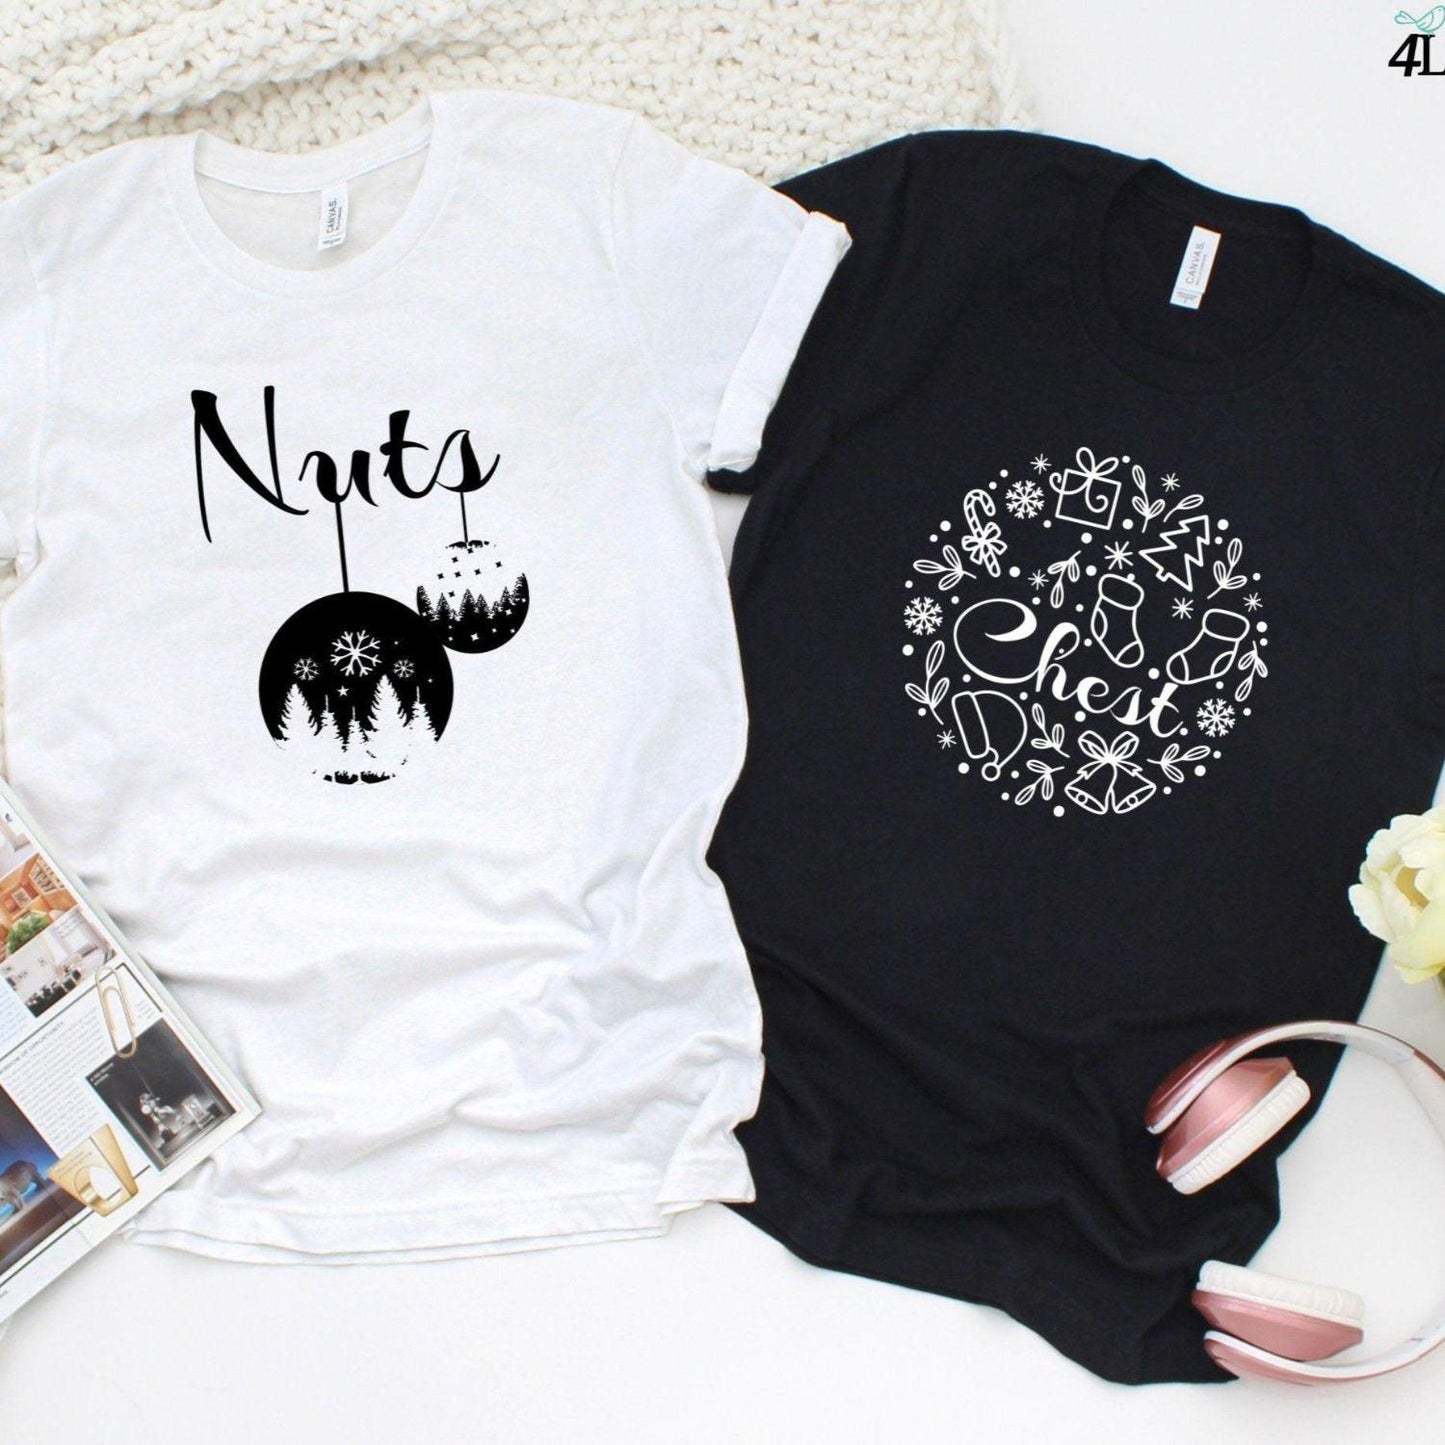 Adorable Nut & Chest Matching Outfits - Ideal Couple's Christmas Gift Set! - 4Lovebirds